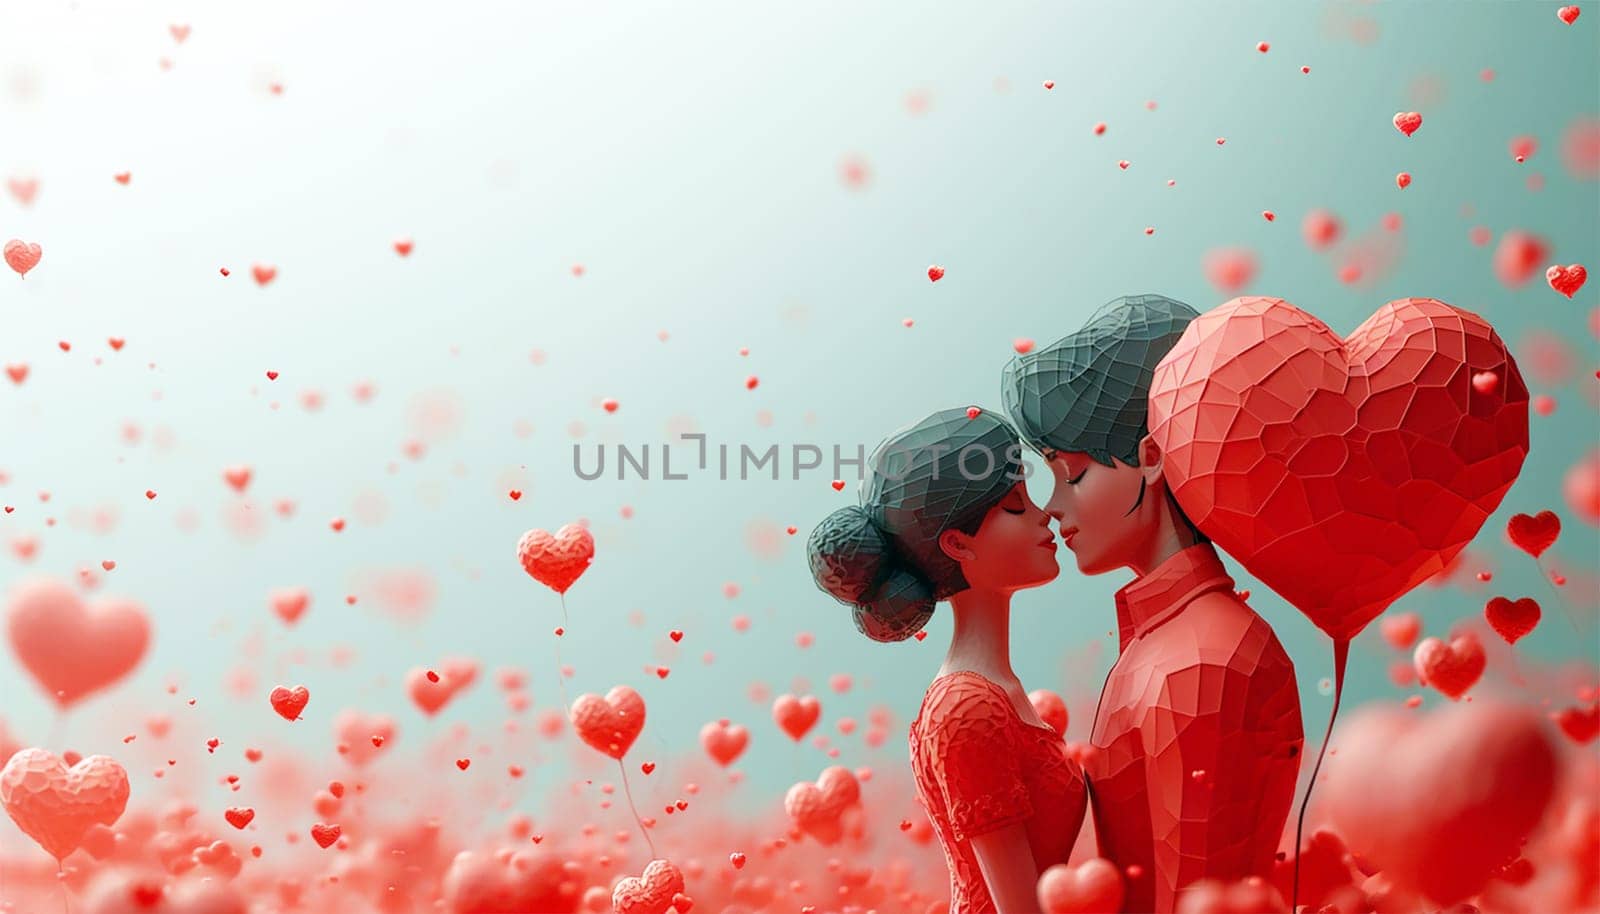 Love,tenderness and romantic feeling concept. Happy Valentine's Day. Young couple in love holding a red heart, Cute animation copy space Valentine's Day